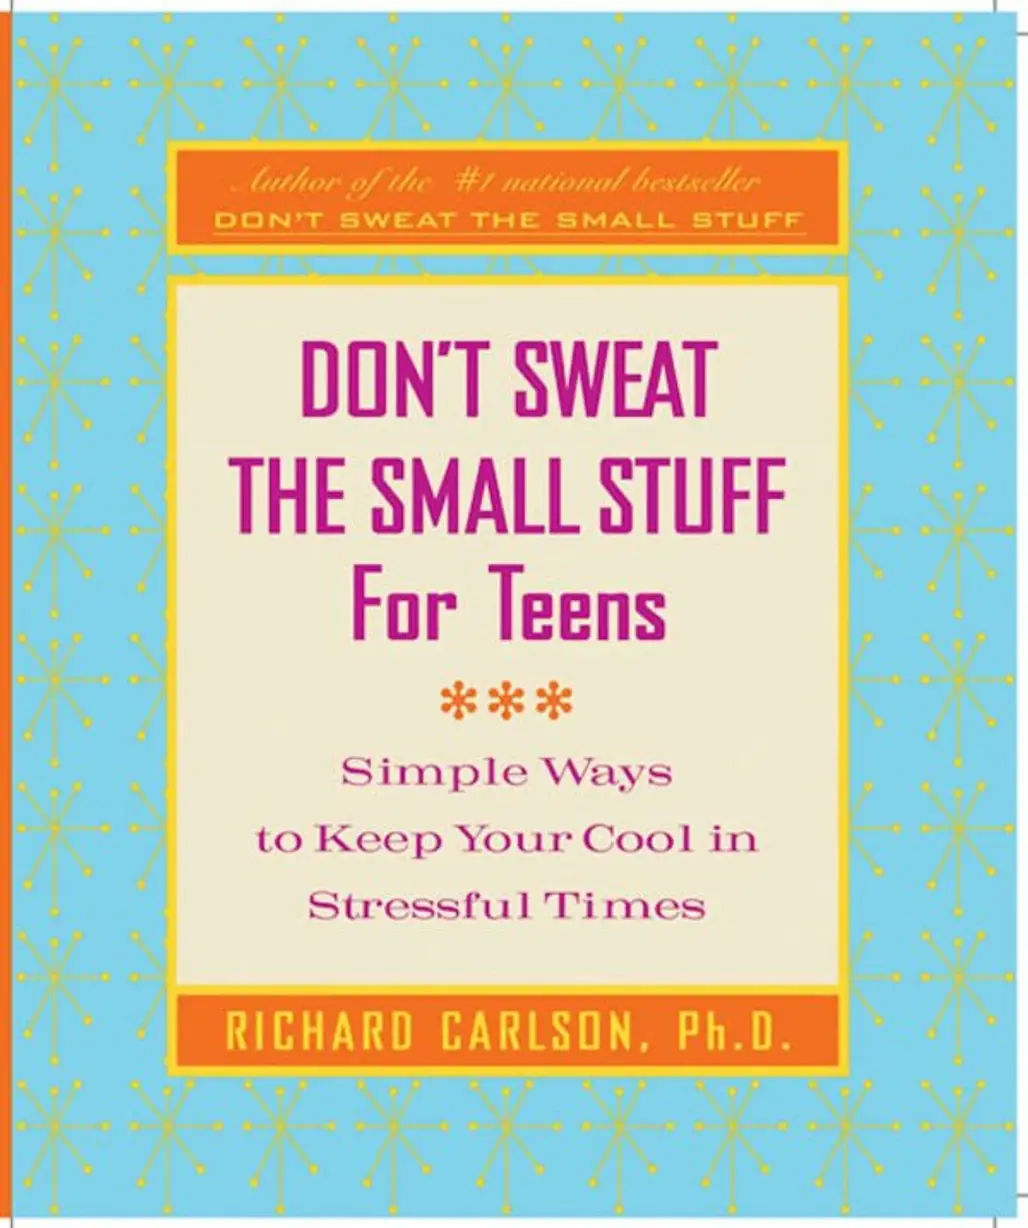 Don’t Sweat the Small Stuff for Teens by Richard Carlson